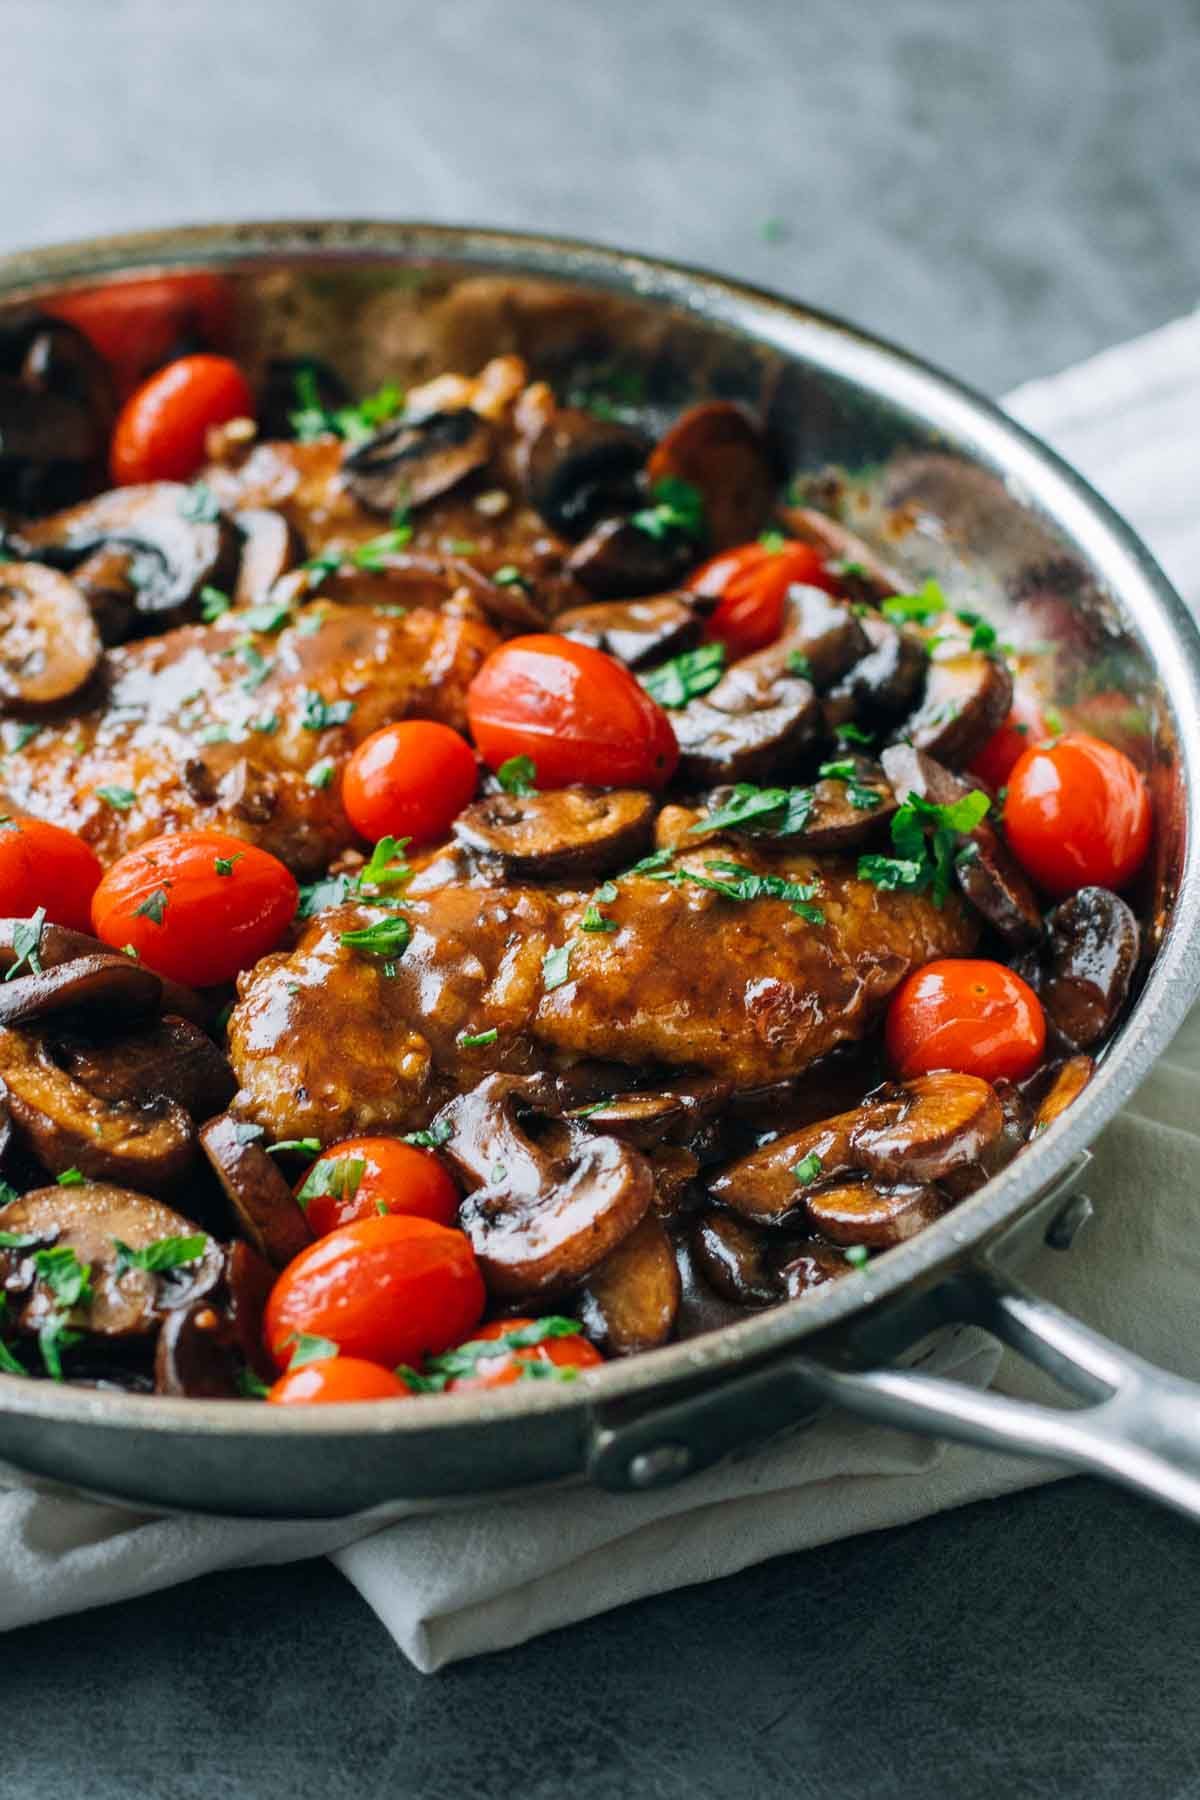 Drunken Chicken Marsala with Tomatoes – full of flavor and vibrant color, plus the most delicious pan-fried